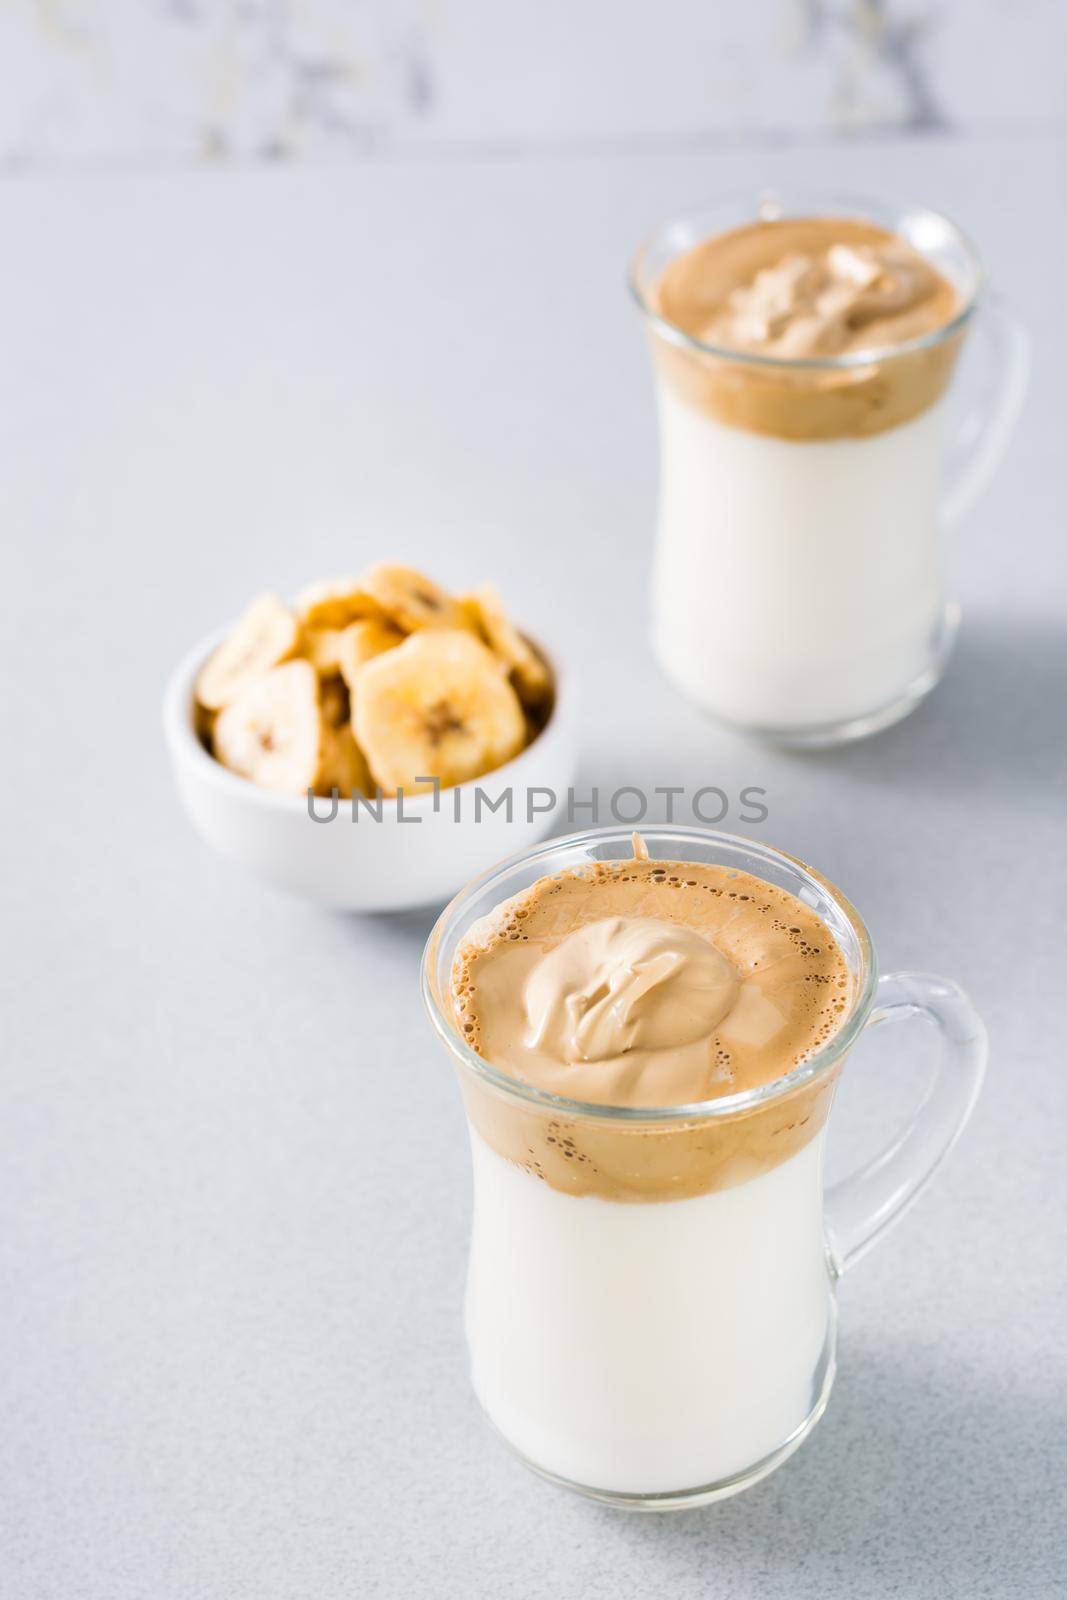 Quarantine trendy cuisine. Two cups with dalgona coffee and banana chips in a bowl on a gray background. Vertical view